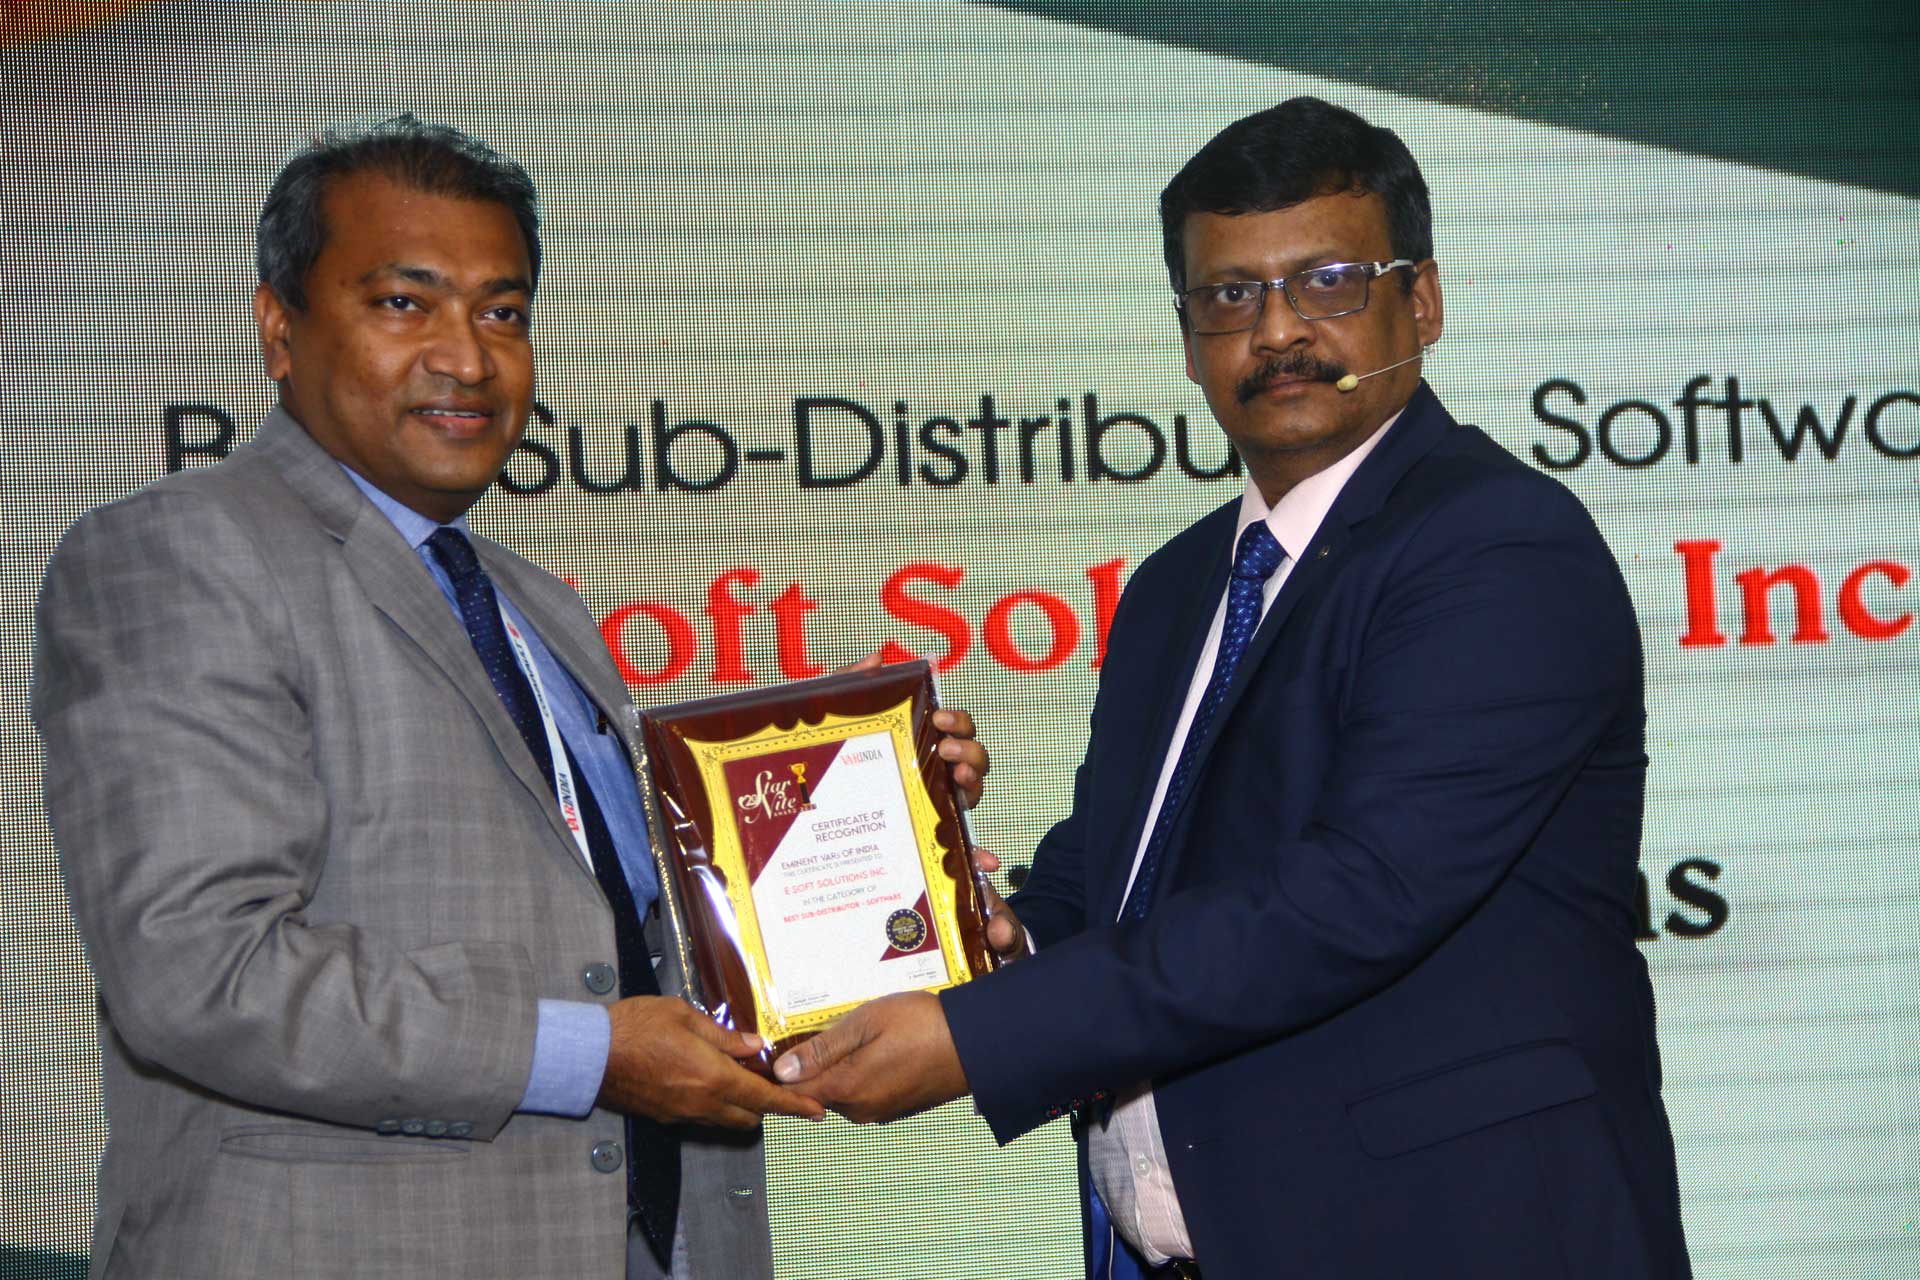 Best Sub-Distributor-Software Award goes to E Soft Solutions Inc. at 20th Star Nite Awards 2021